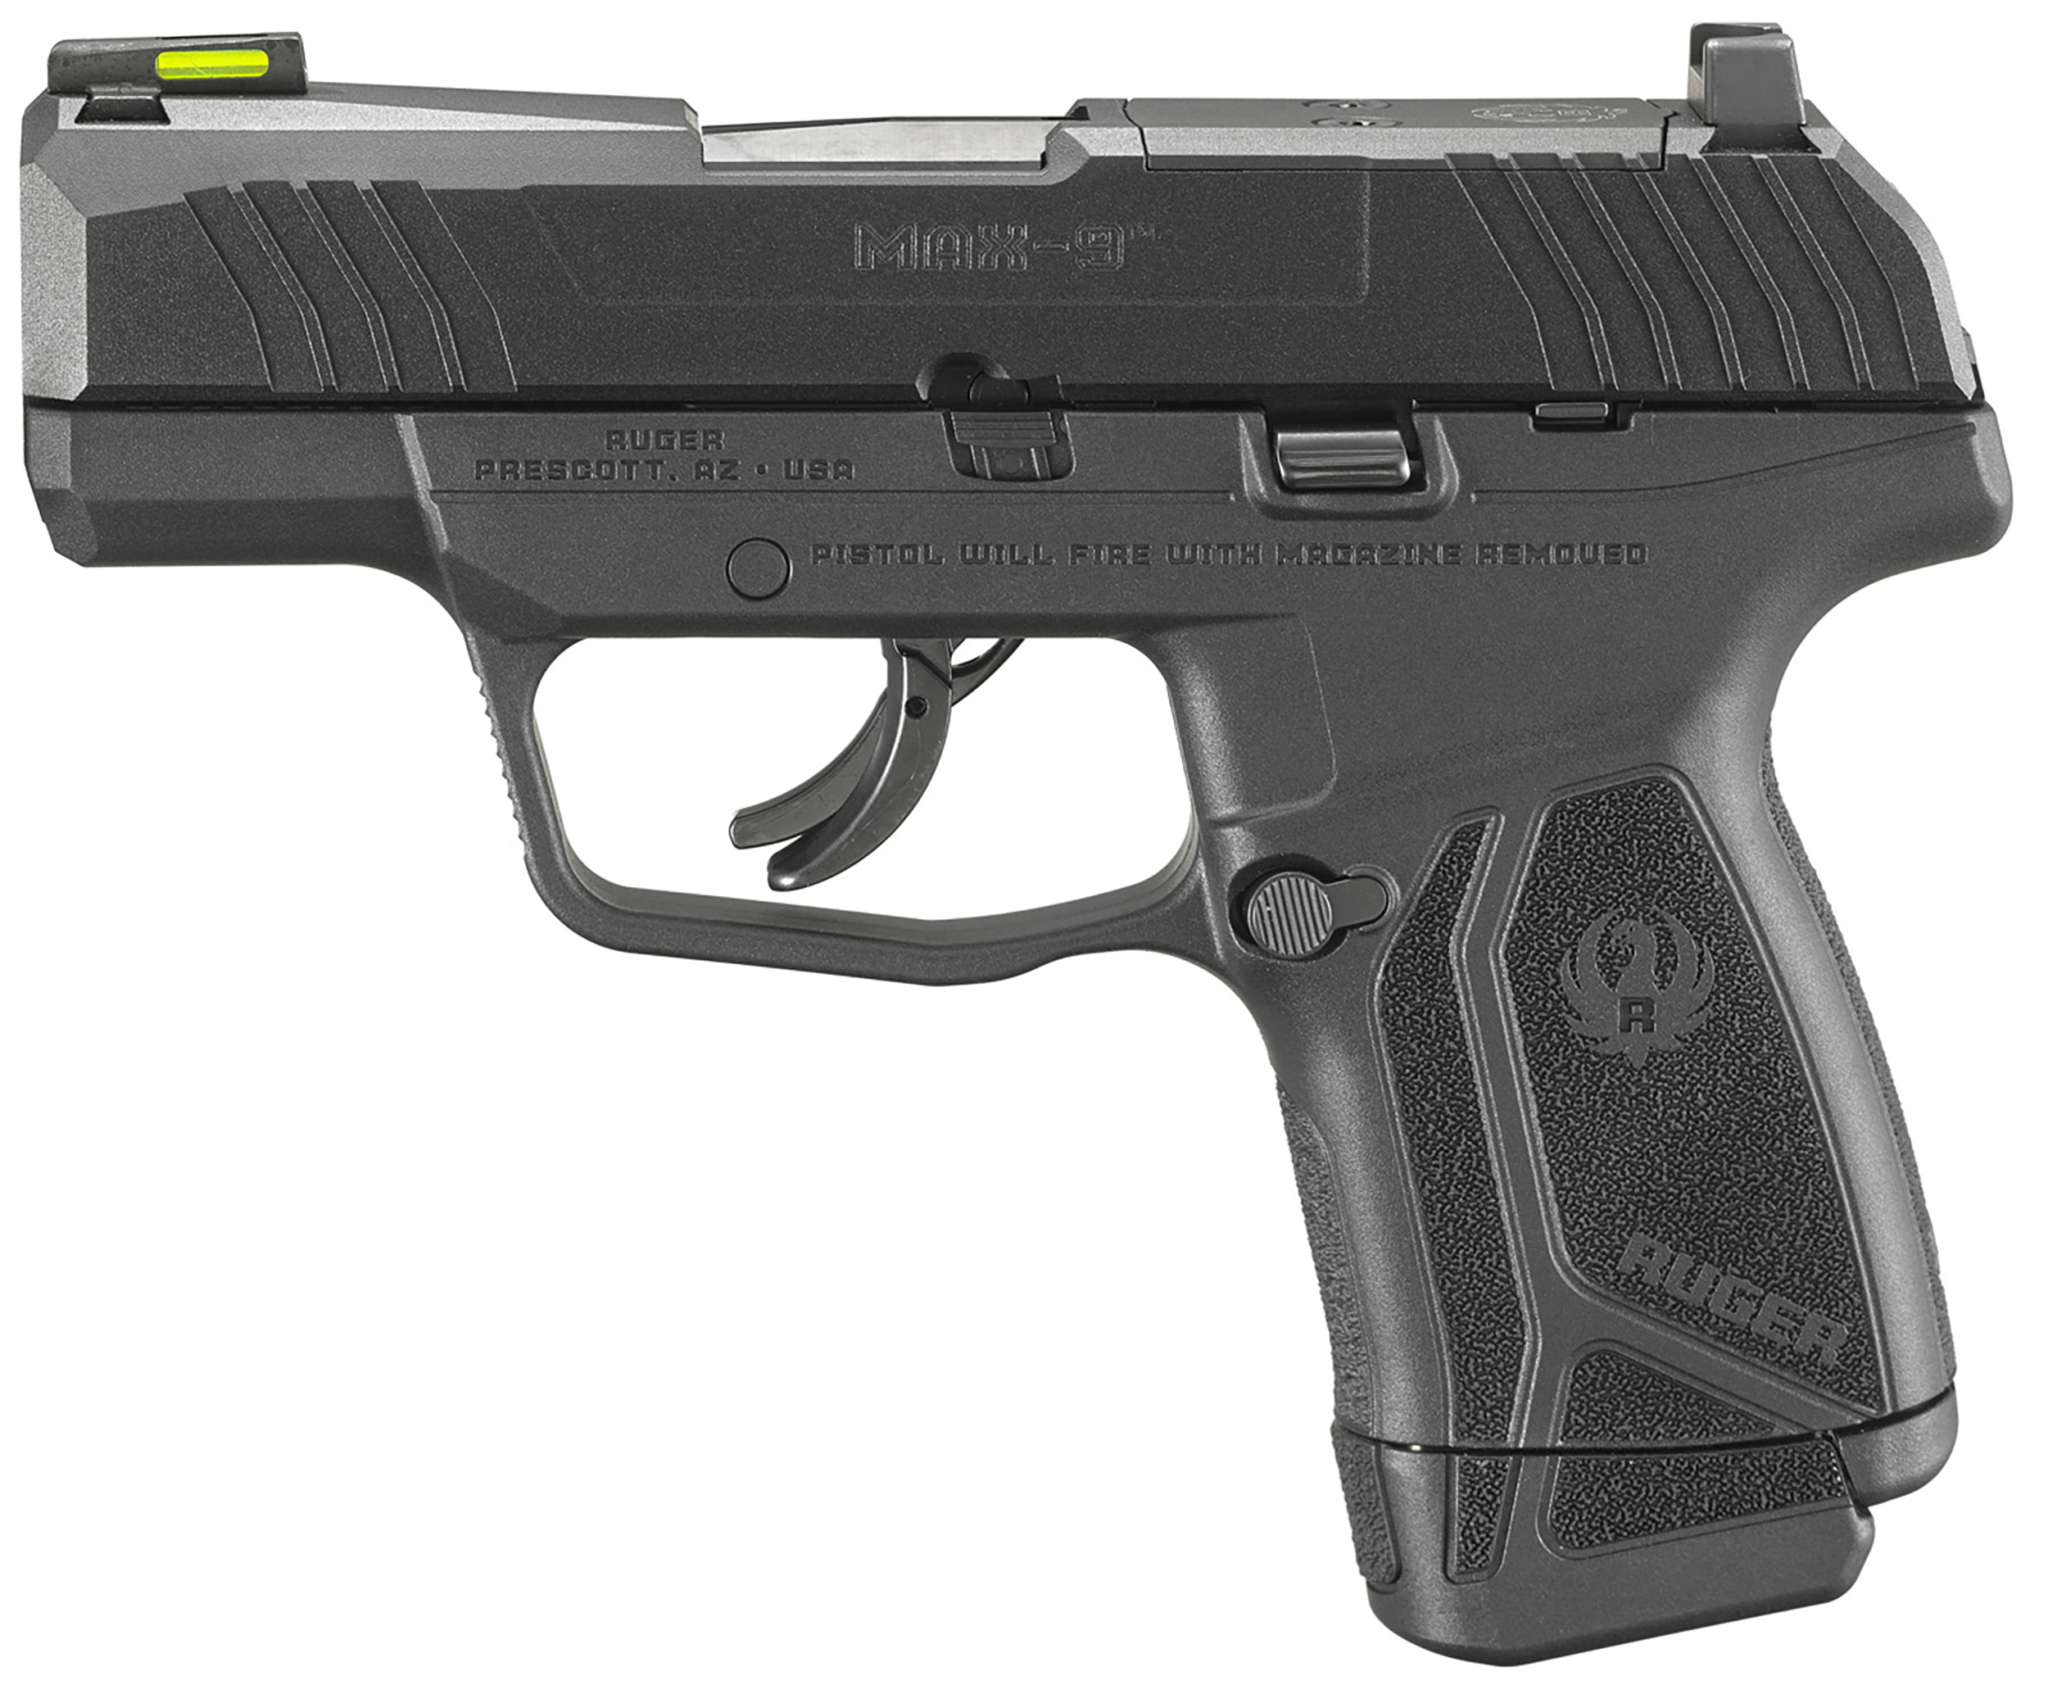 Ruger Max 9 9mm Pistol Optic Ready With Tritium Fiber Optic Front